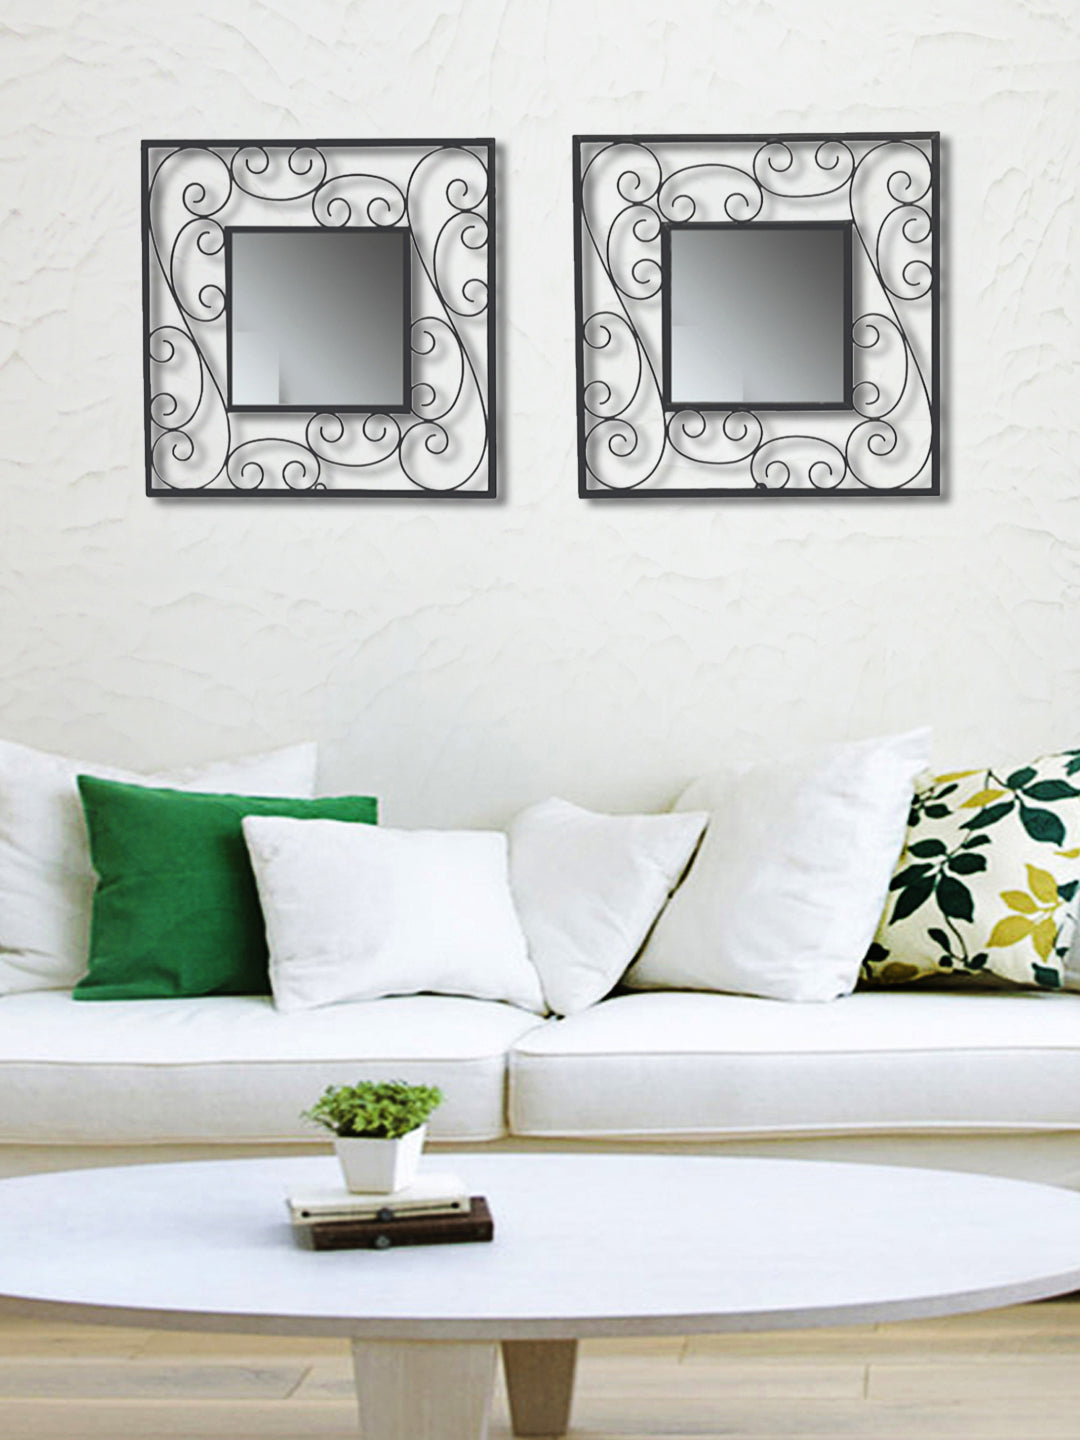 Hosley Set of 2 Square Decorative Wall Mirrors